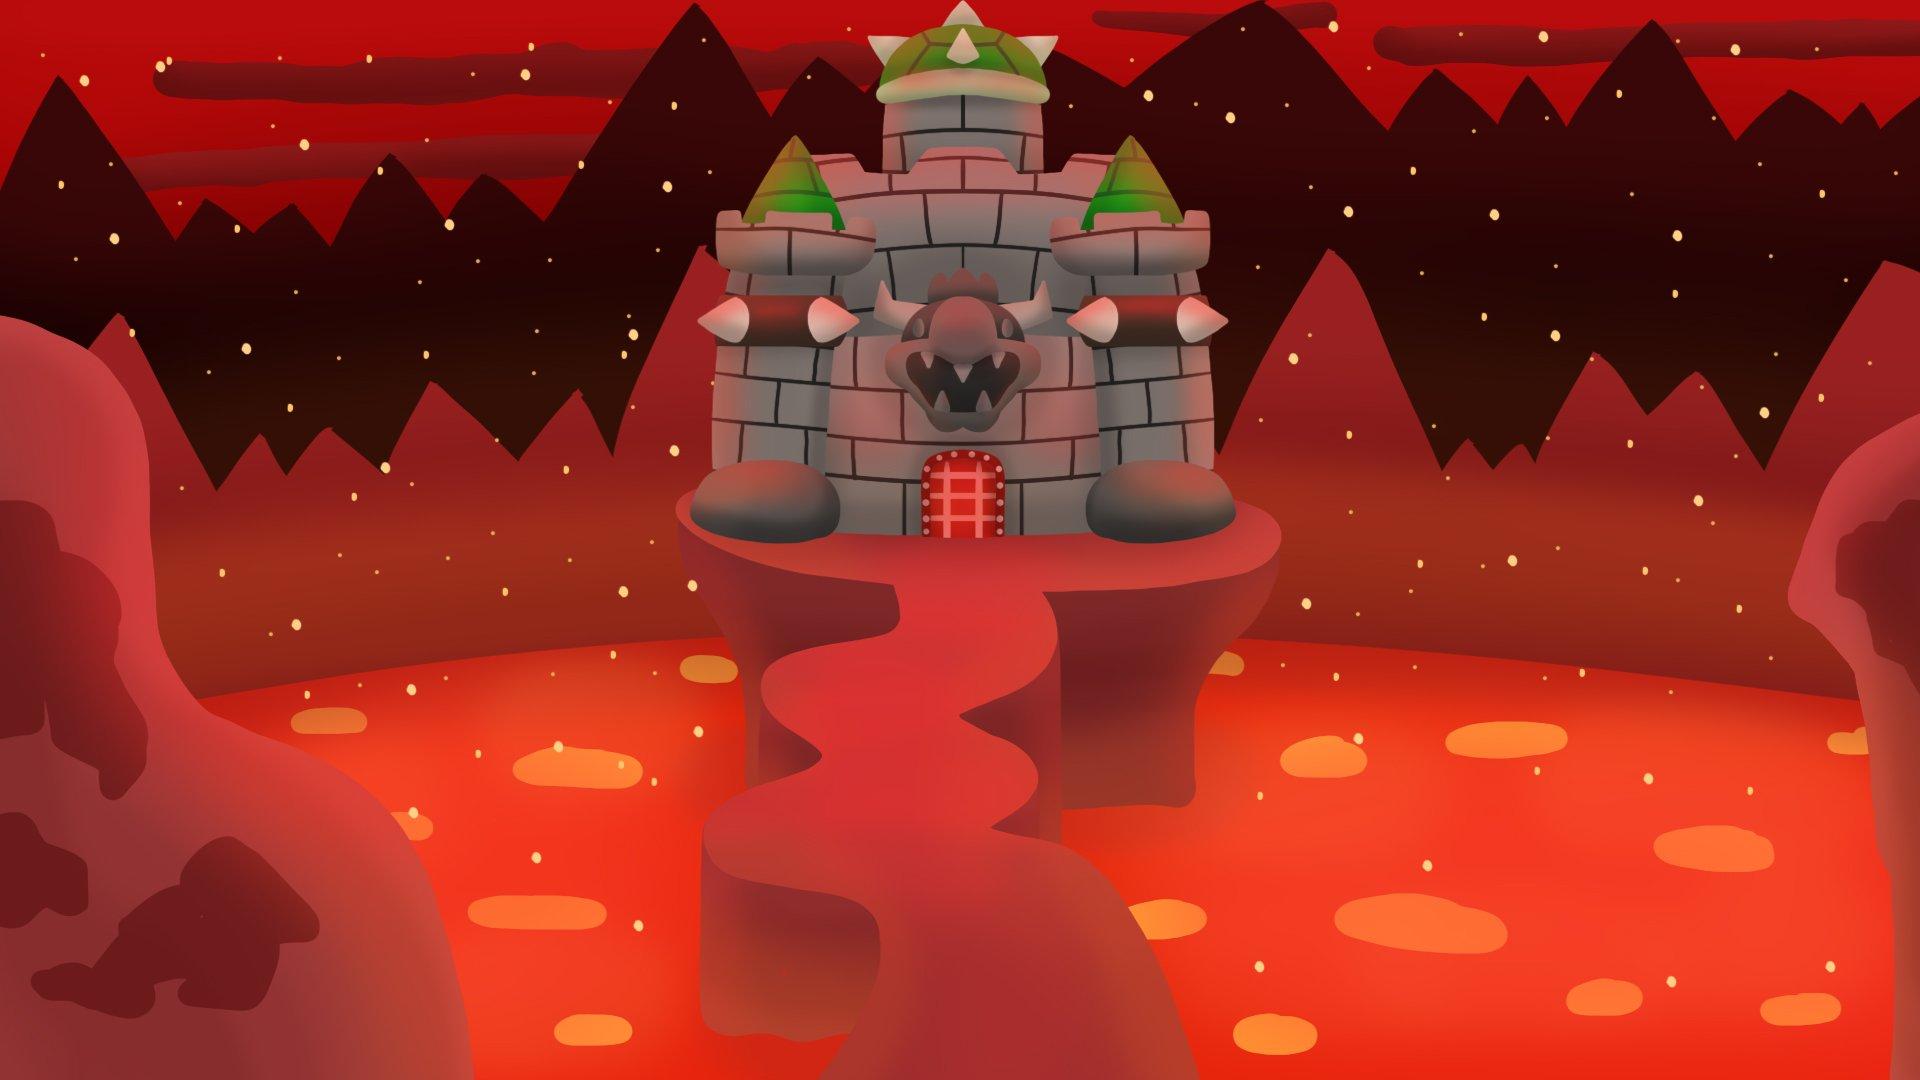 A personal take on Bowser's Castle in Paper Mario